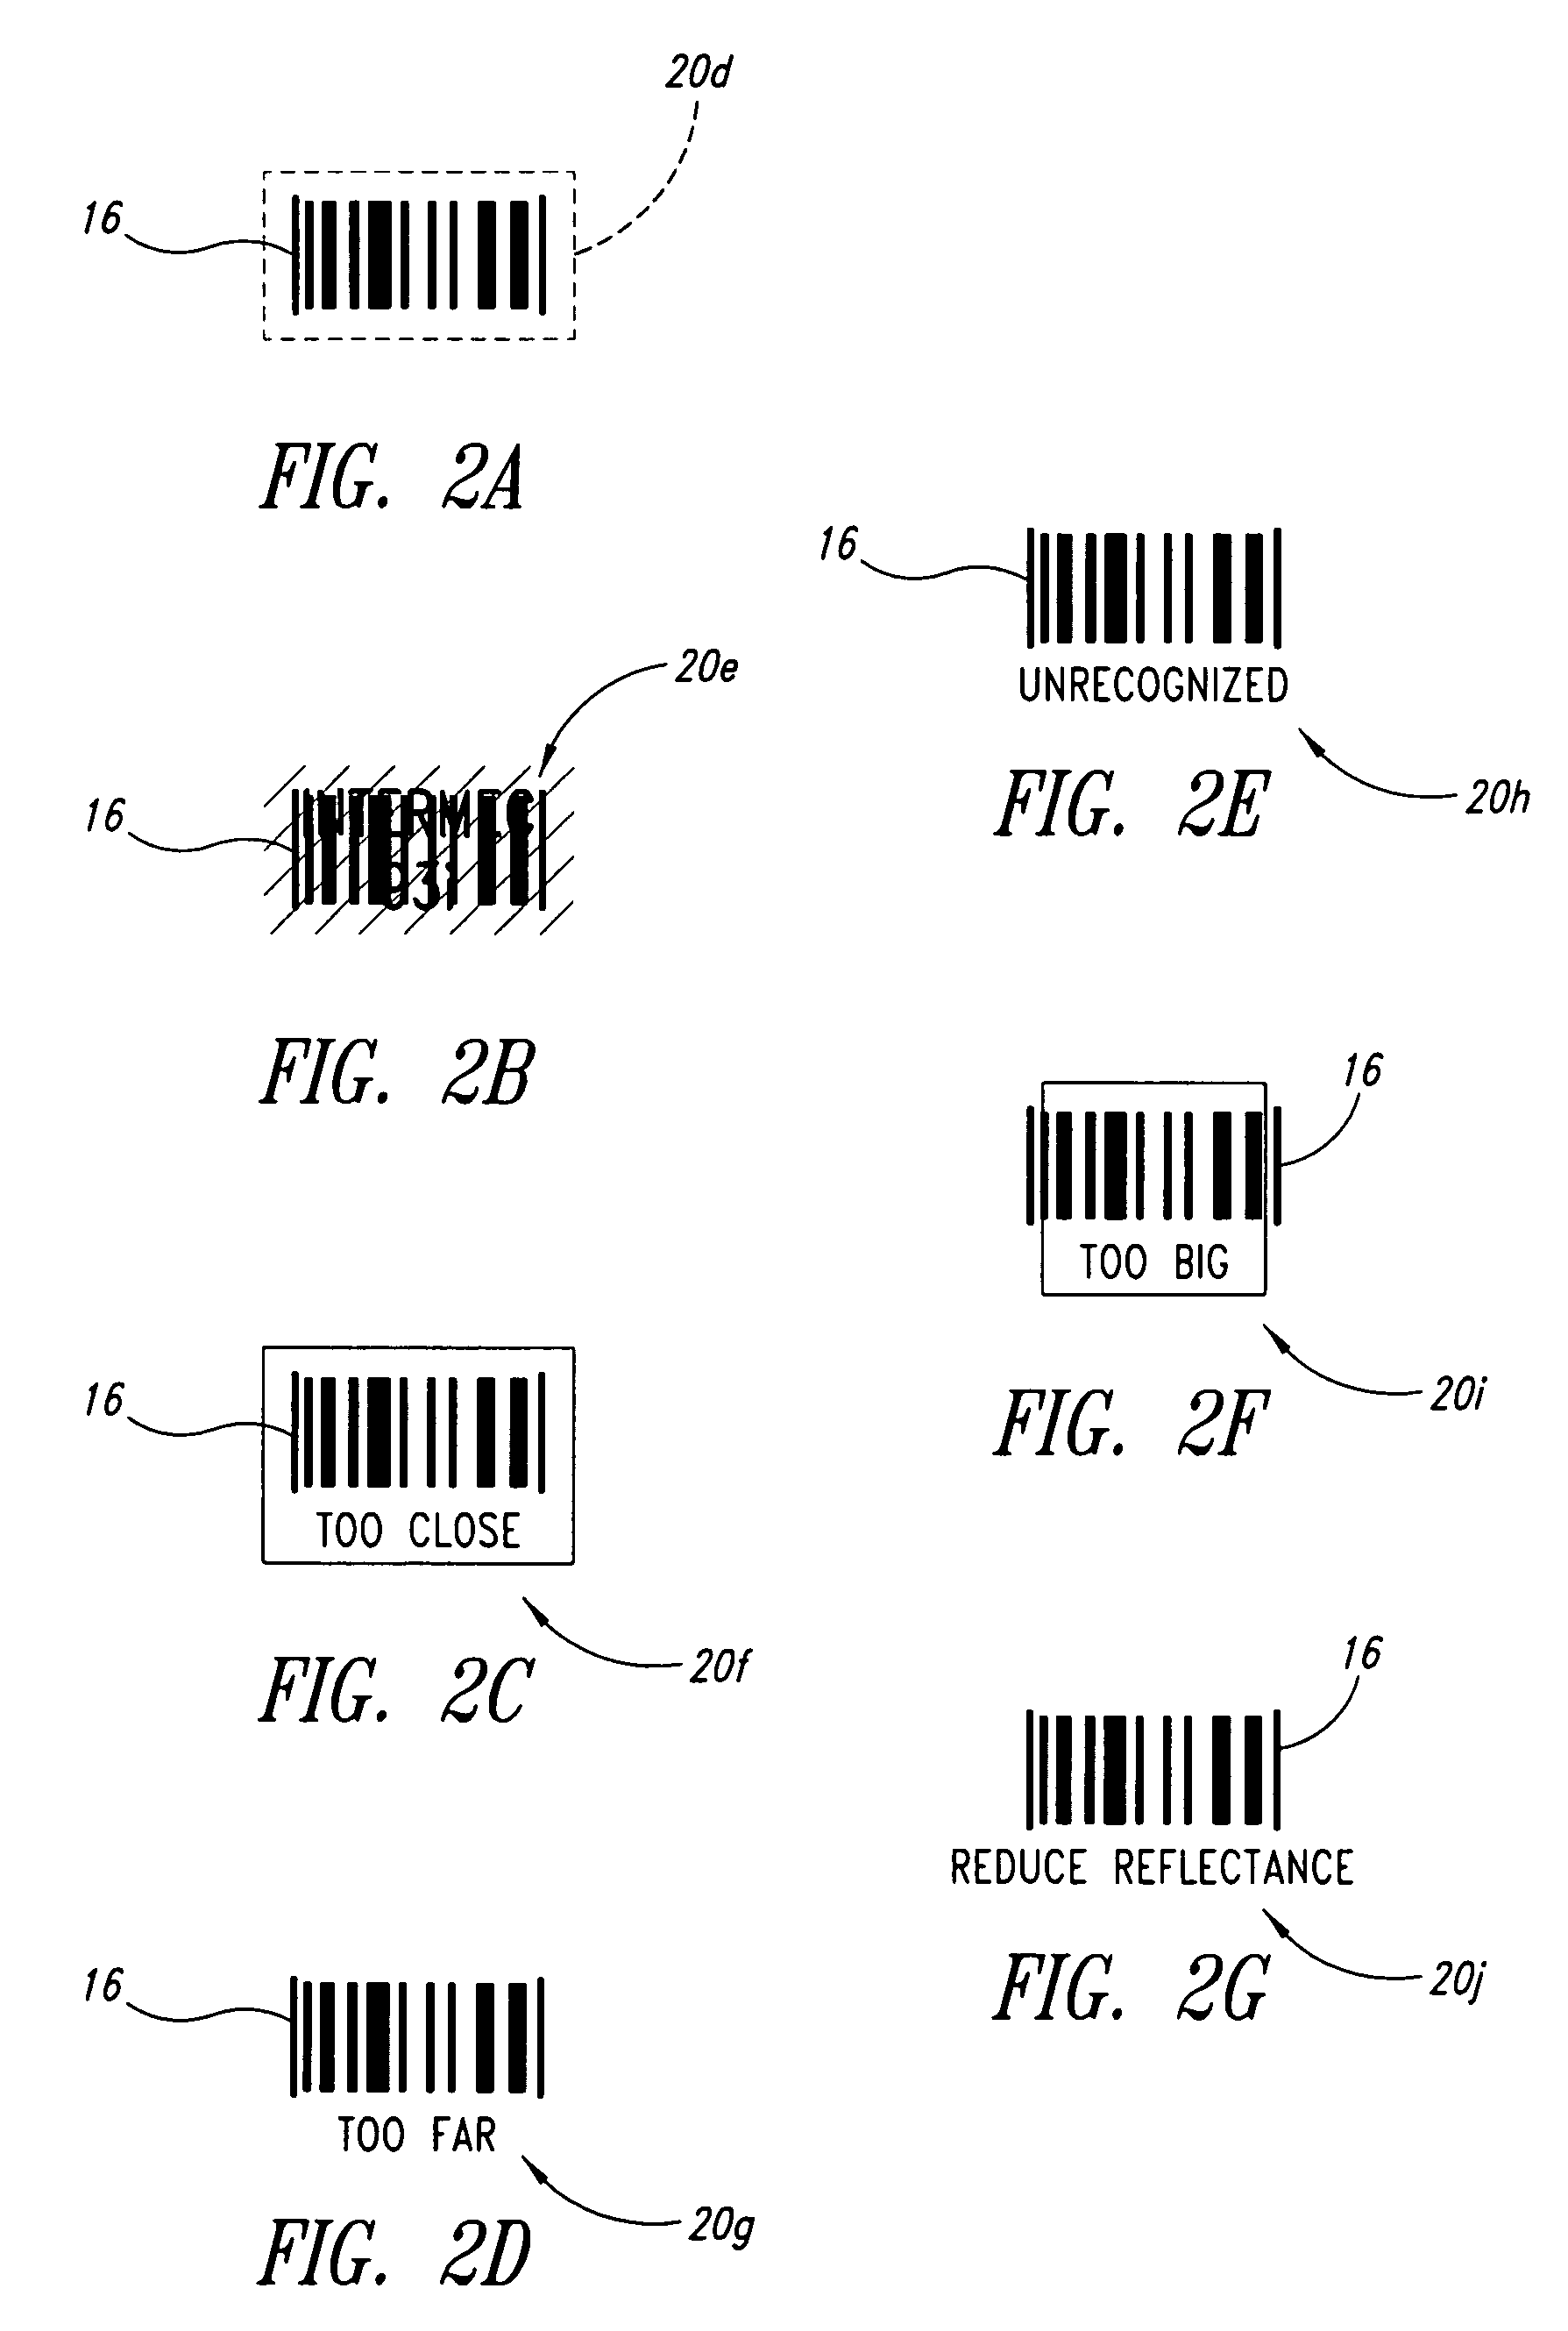 Methods, apparatuses and articles for automatic data collection devices, for example barcode readers, in cluttered environments